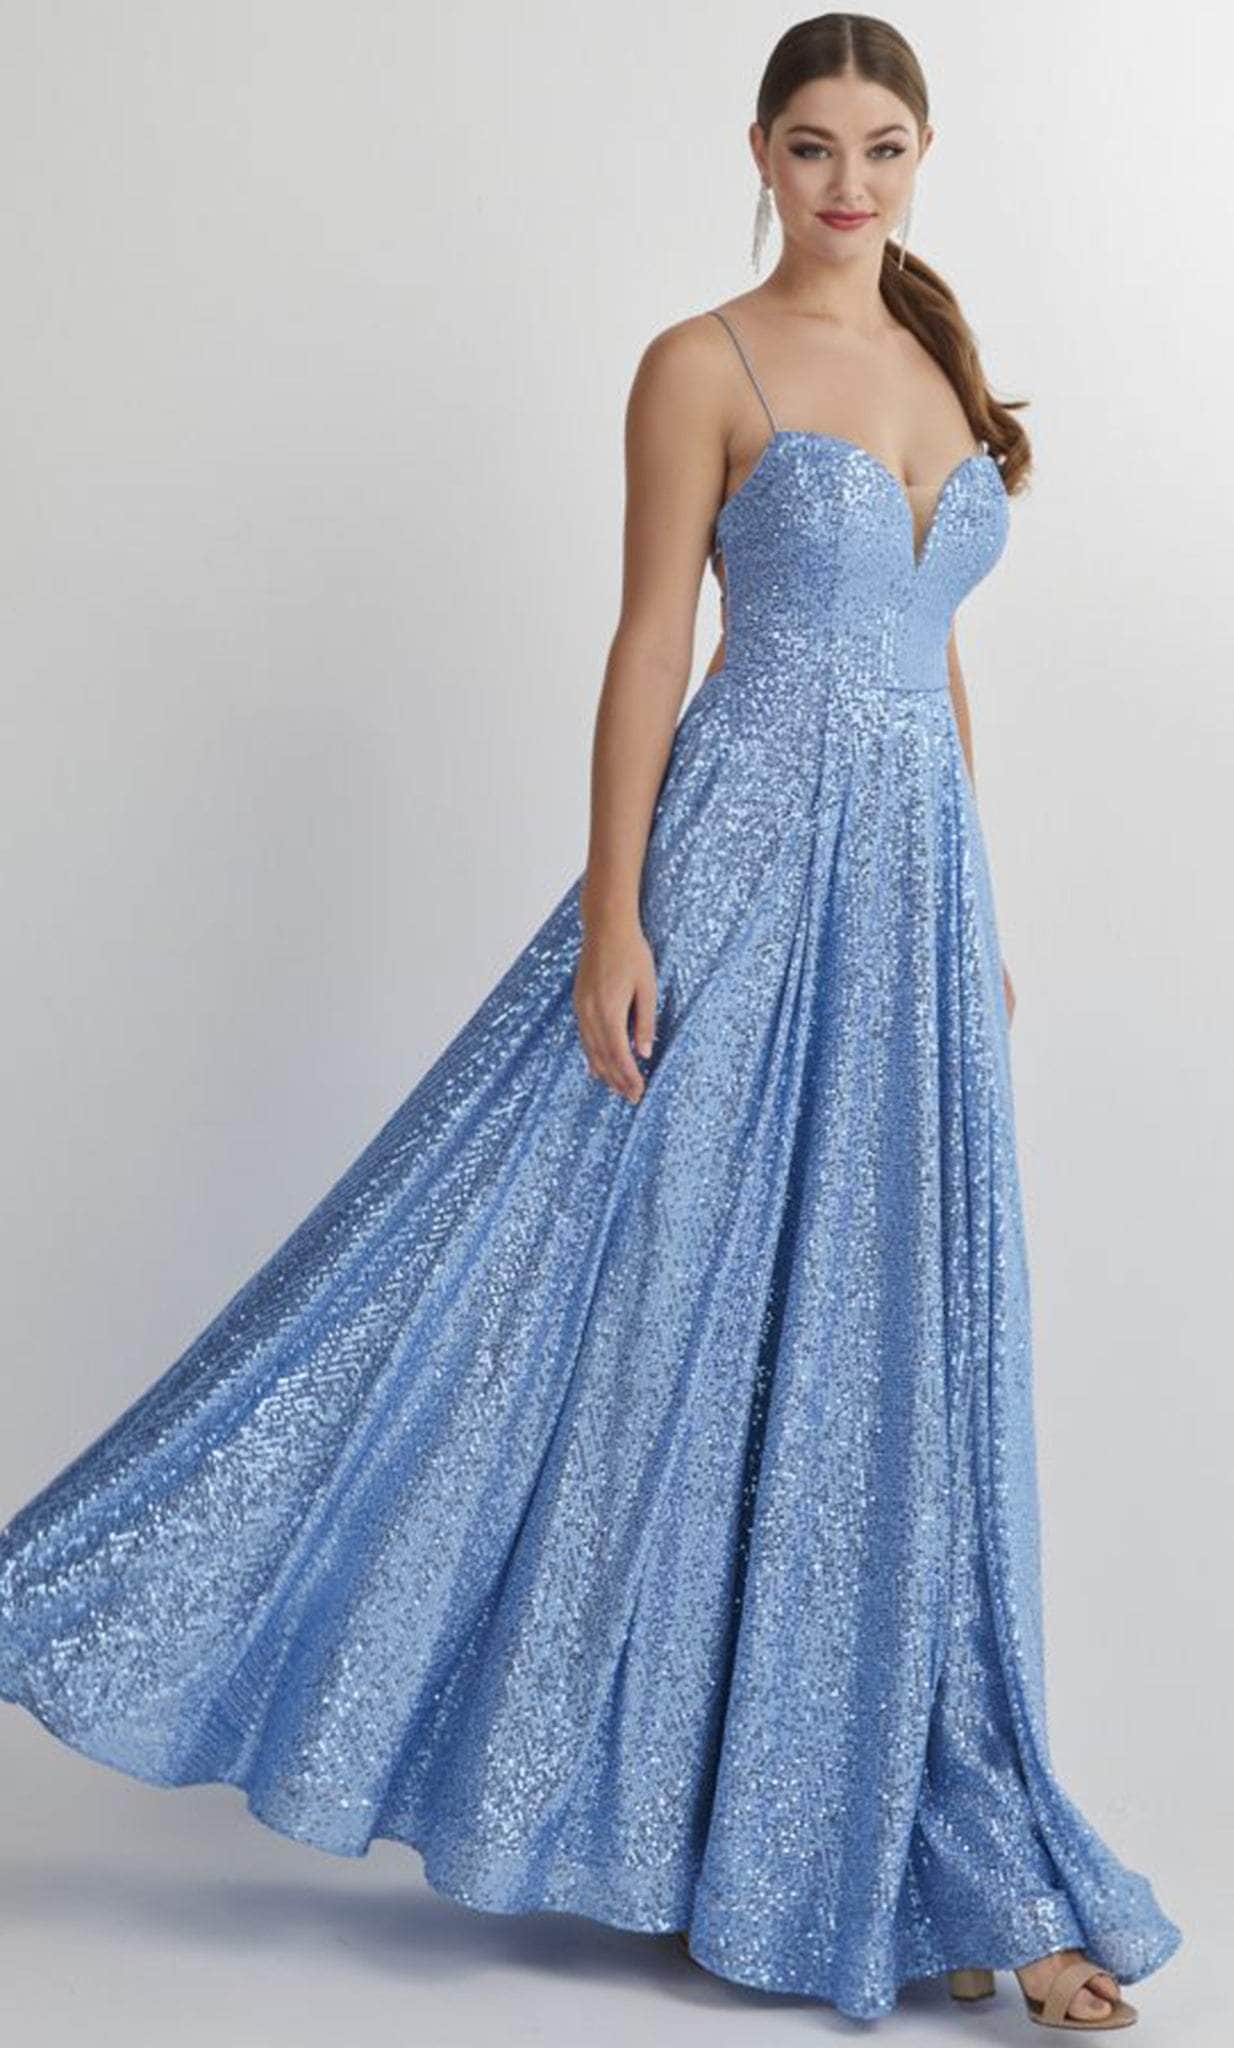 Image of Studio 17 Prom 12900 - Sleeveless A-line Evening Gown